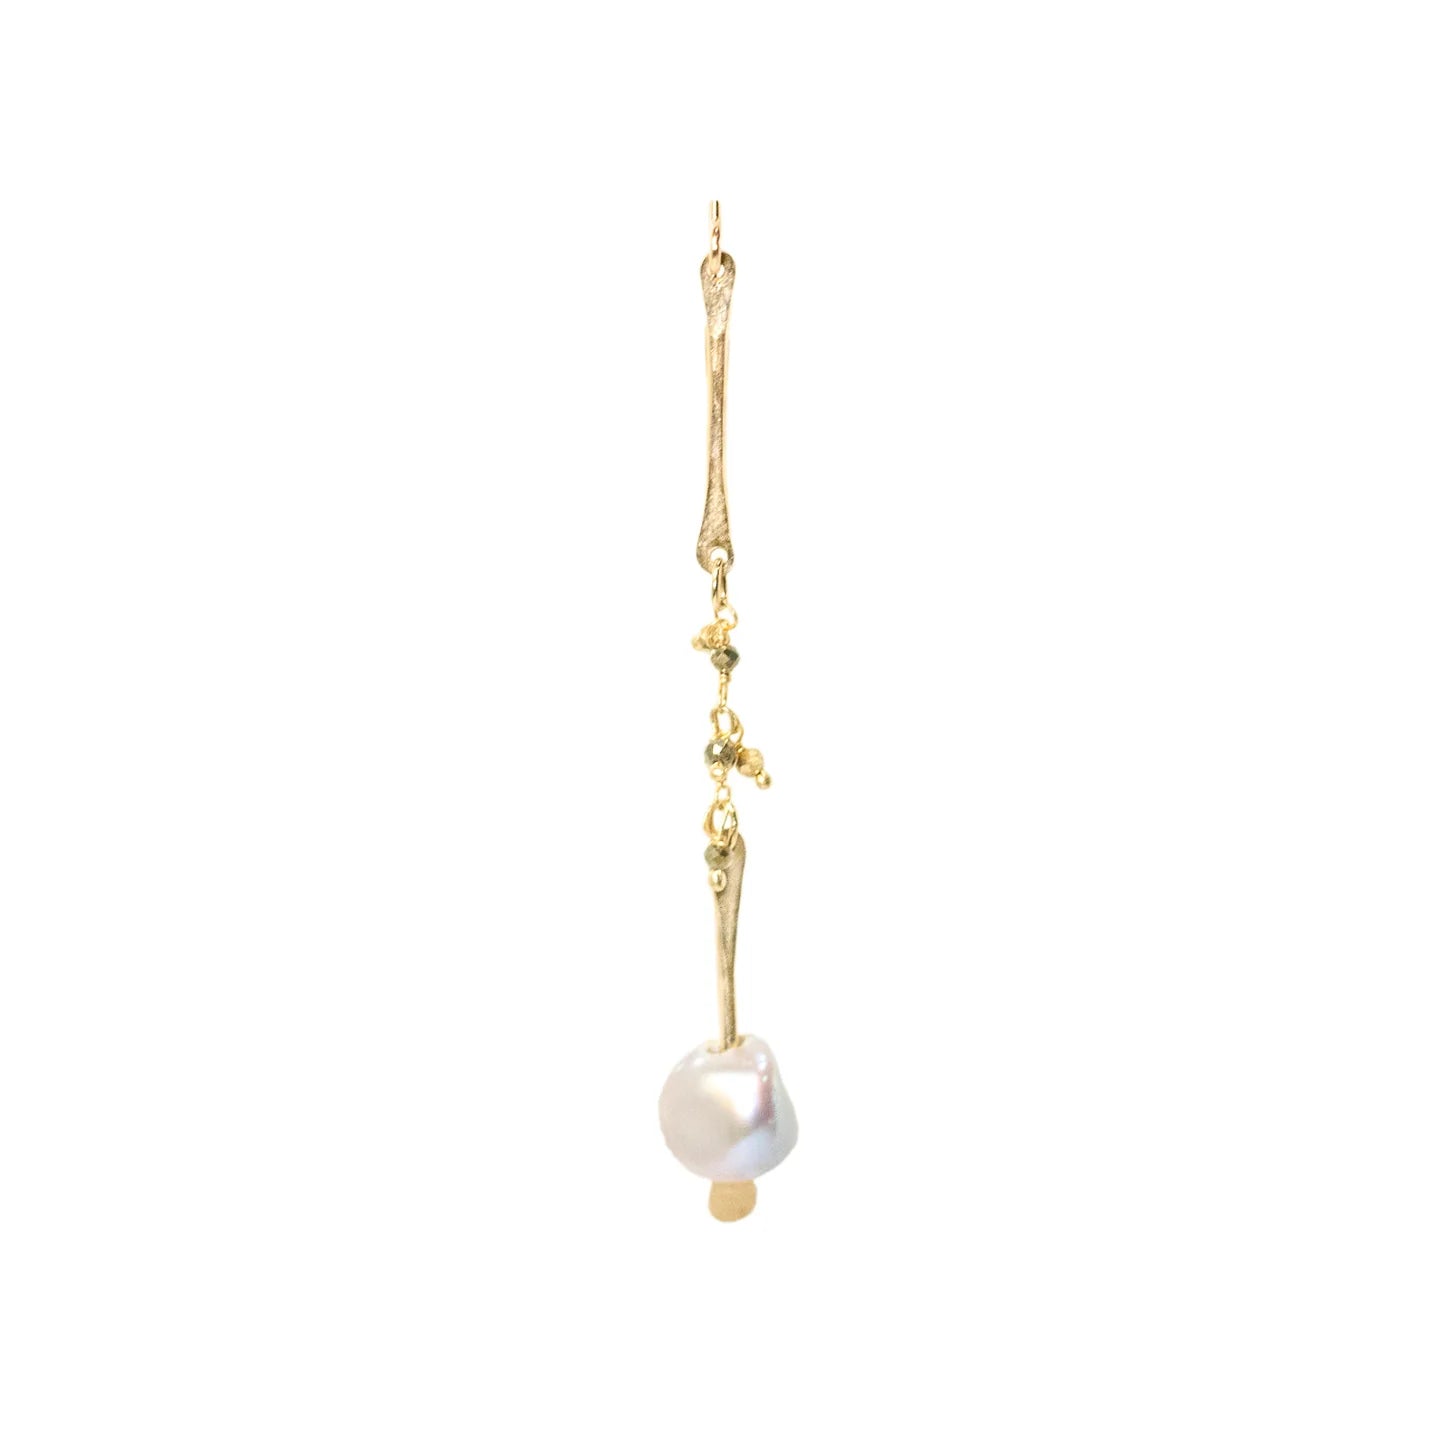 Pearl Drop Earring with Labradorite Stones